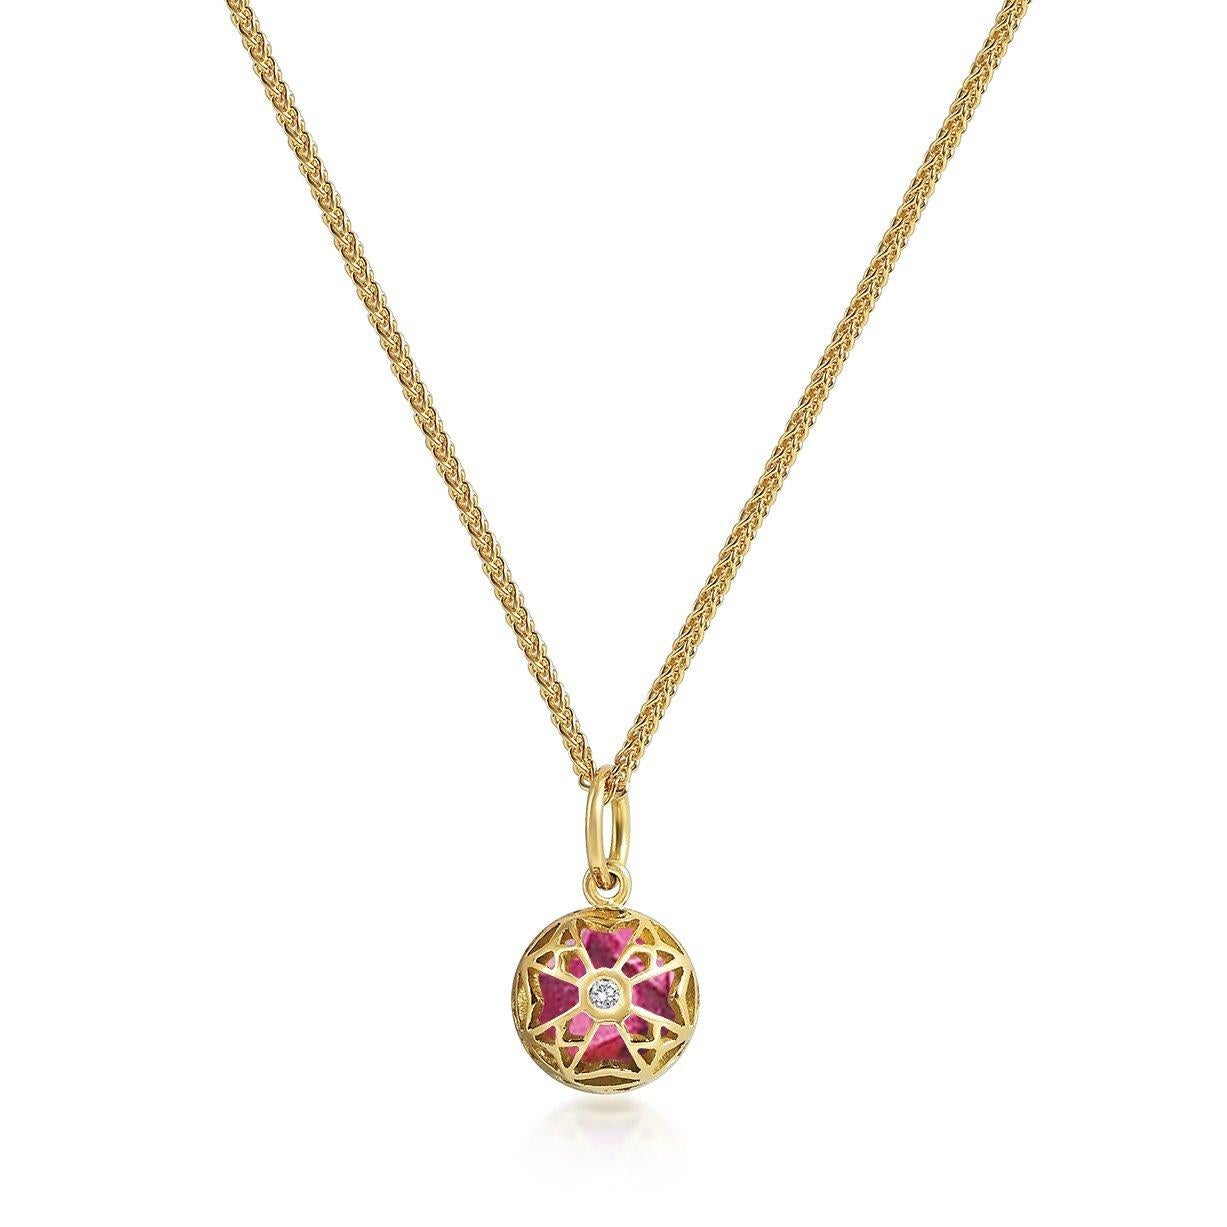 Handcrafted 1.30 Carats Pink Tourmaline 18 Karat Yellow Gold Pendant Necklace. The 7mm natural stone is set in our iconic hand pierced gold lace to let the light through. Our pendants are the ideal gift. 

Here presented on our finely knitted gold